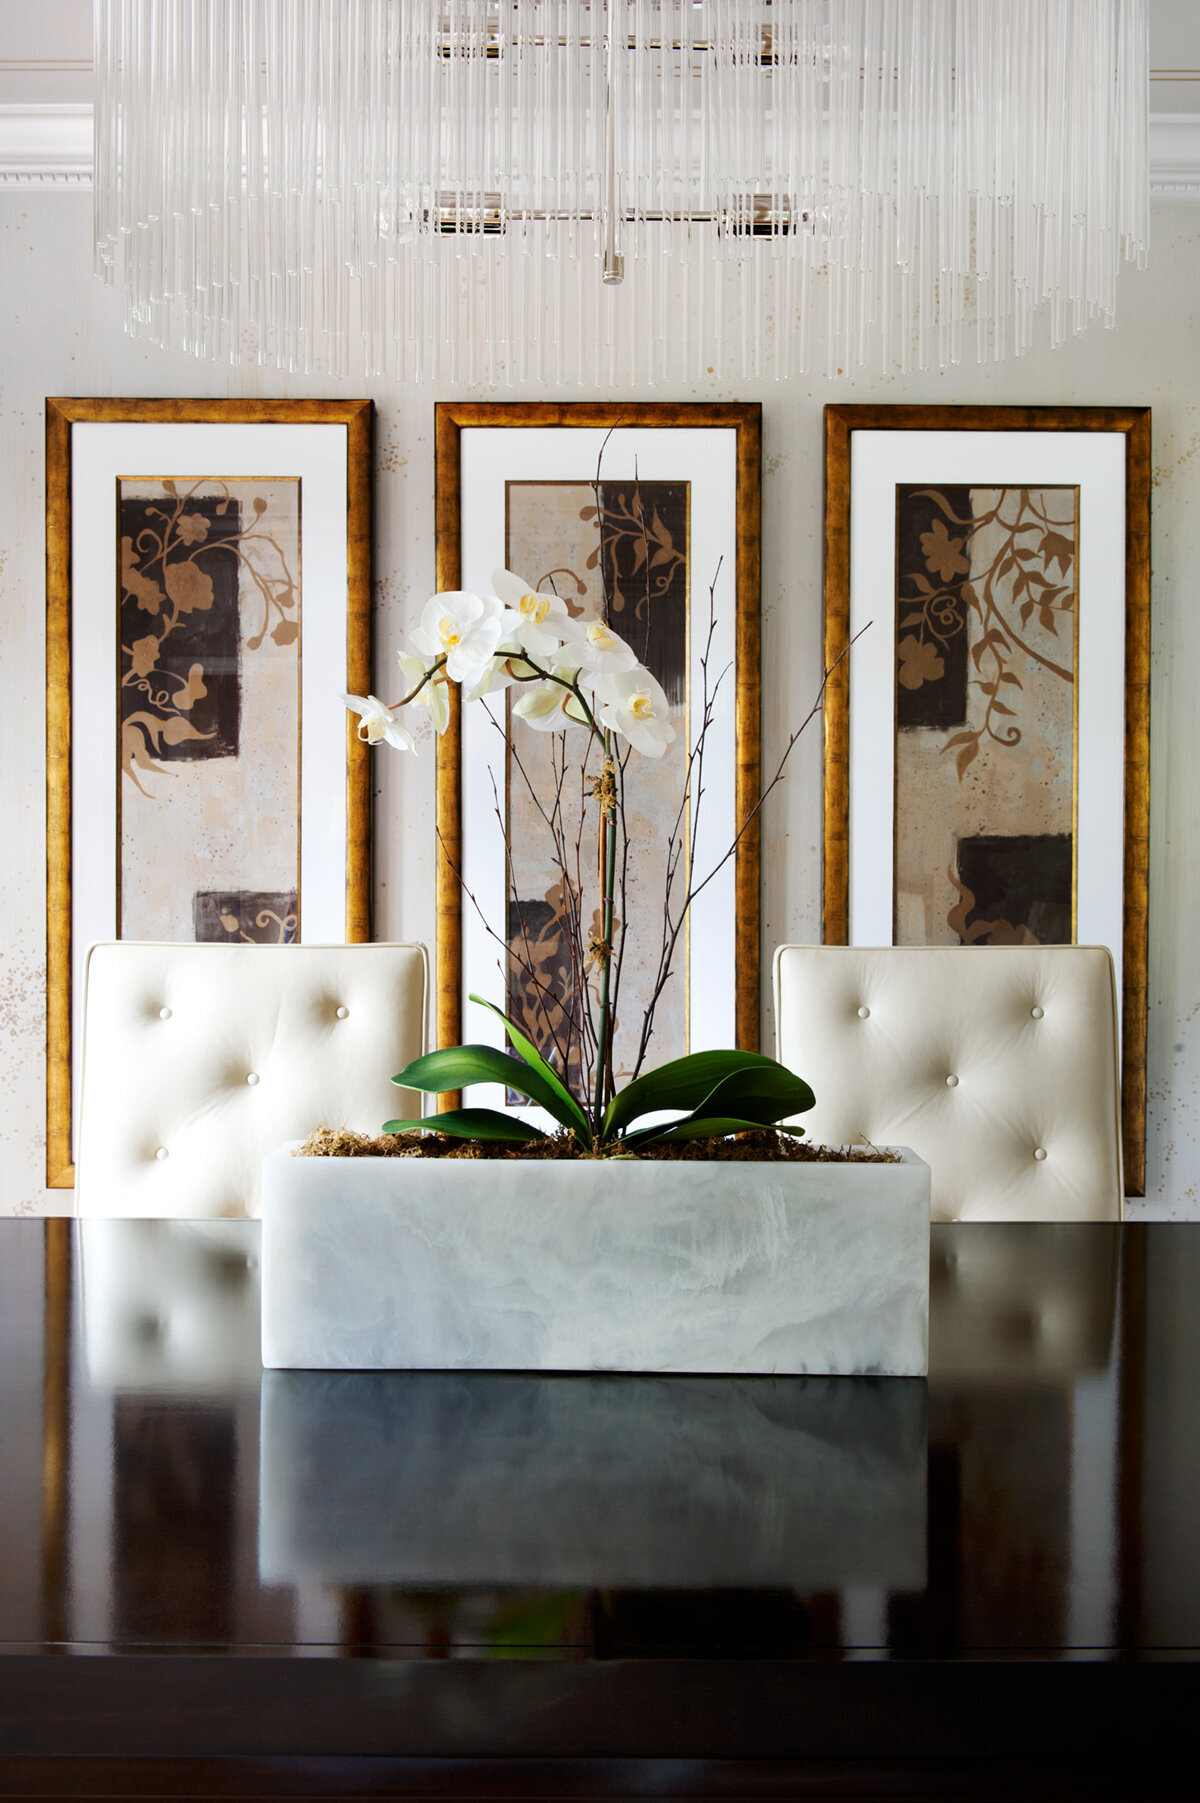 Panageries Residential Interior Design | Transitional Suburban Haven Formal Dining Room Orchid Center Piece back by Floral Modern Art